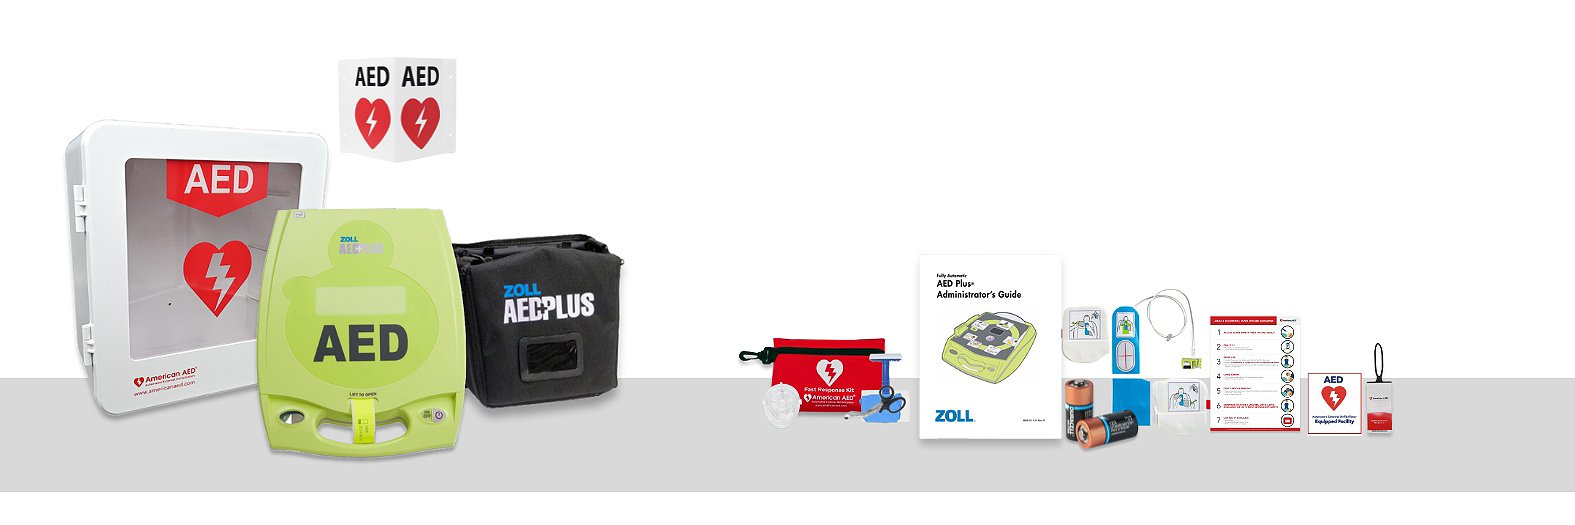 Zoll AED Plus Complete Defibrillator Package